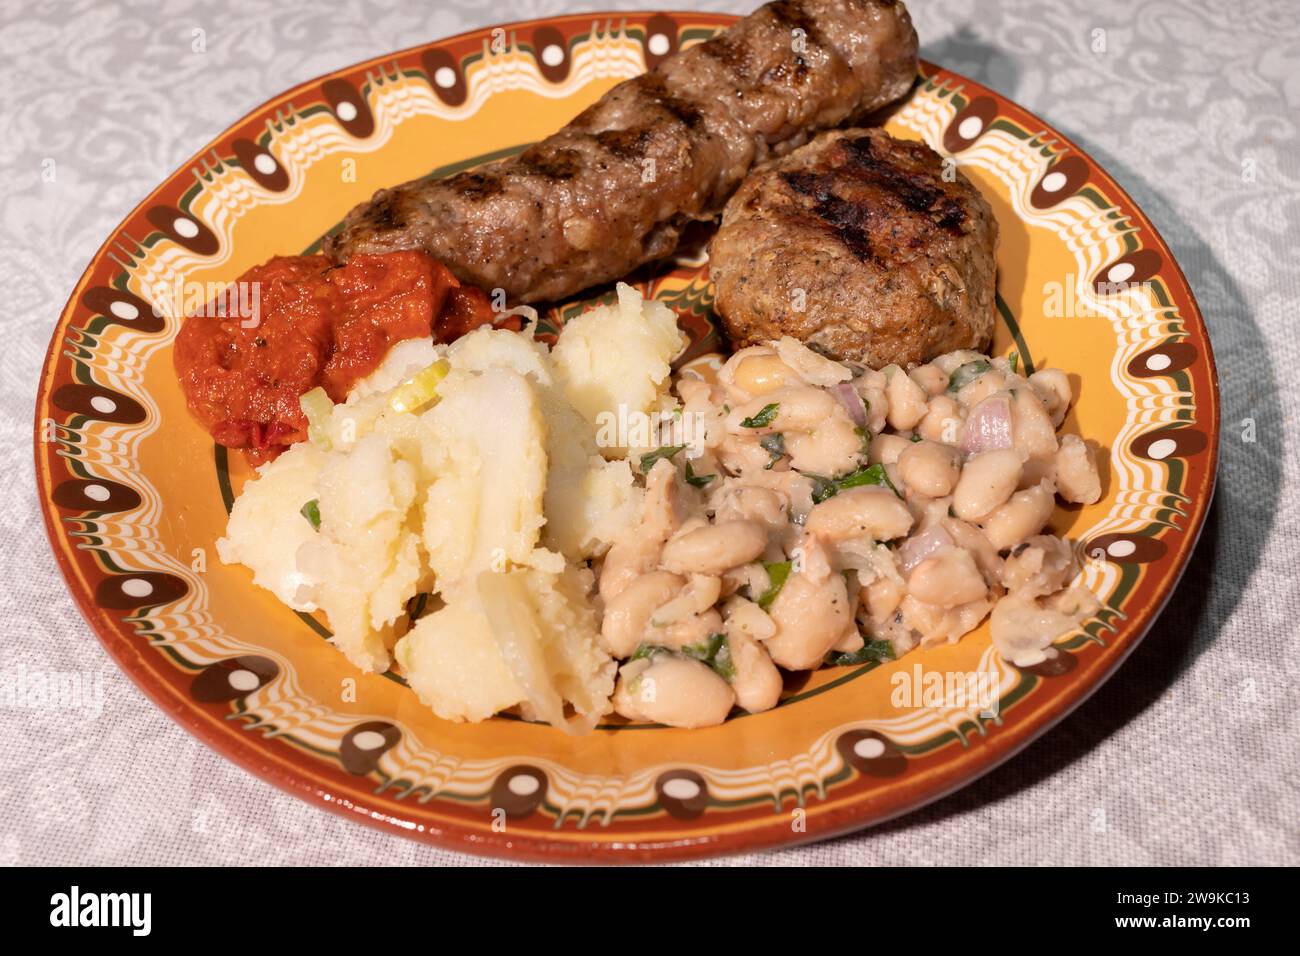 Closeup Plate With Traditional Bulgarian Food. Mashed Potato, White Beans, Haricot, Vegetable Relish Ljutenica, Grilled Minced Meat With Spices Stock Photo